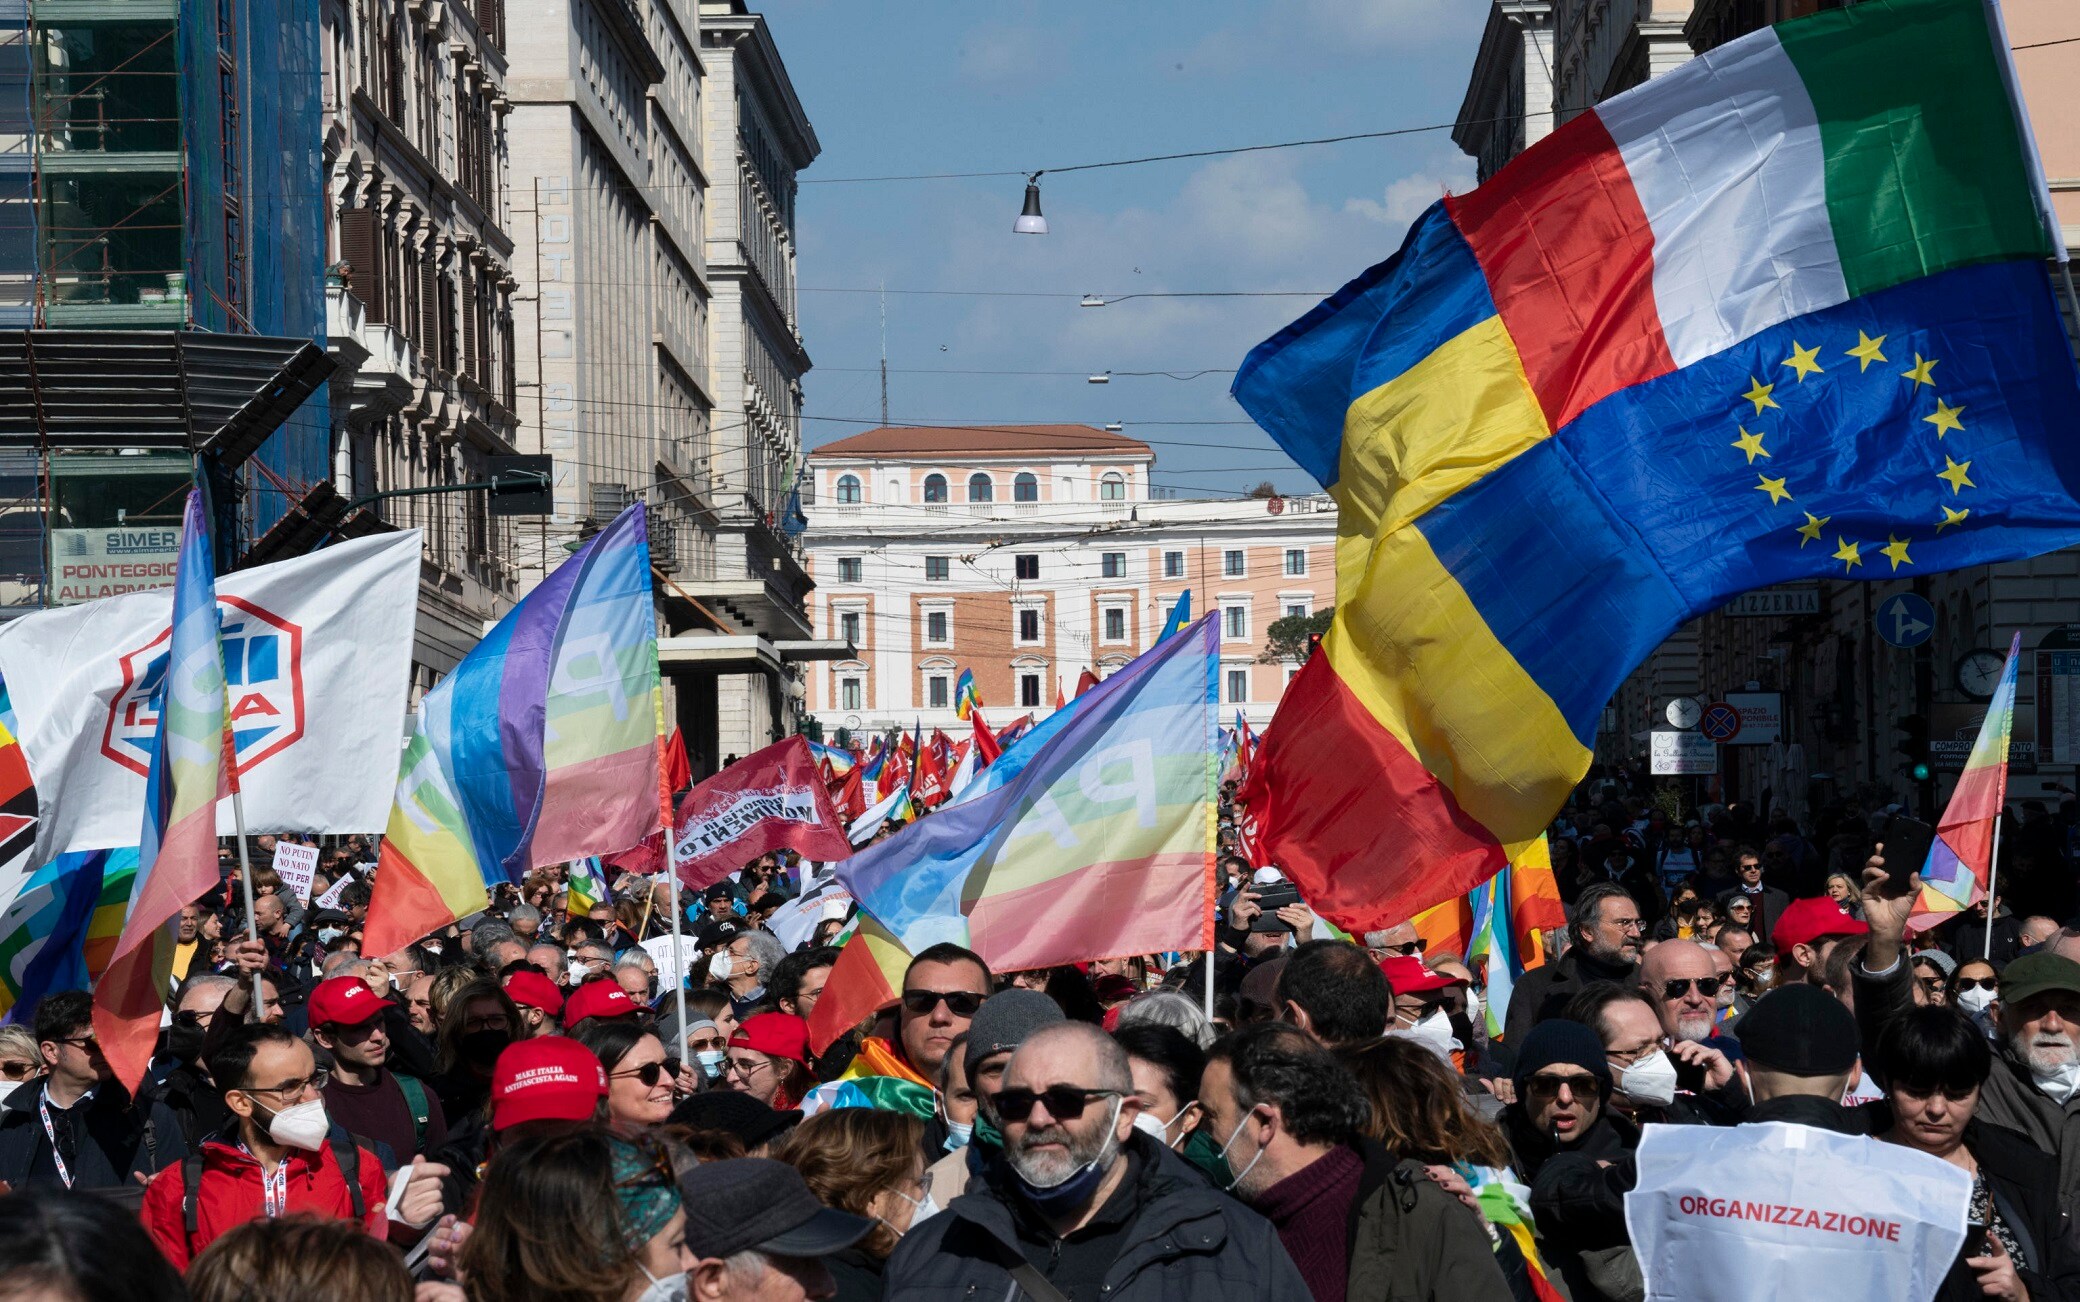 People attend a demonstration to ask for peace in Ukraine, in Rome, Italy, 05 March 2022. ANSA/CLAUDIO PERI